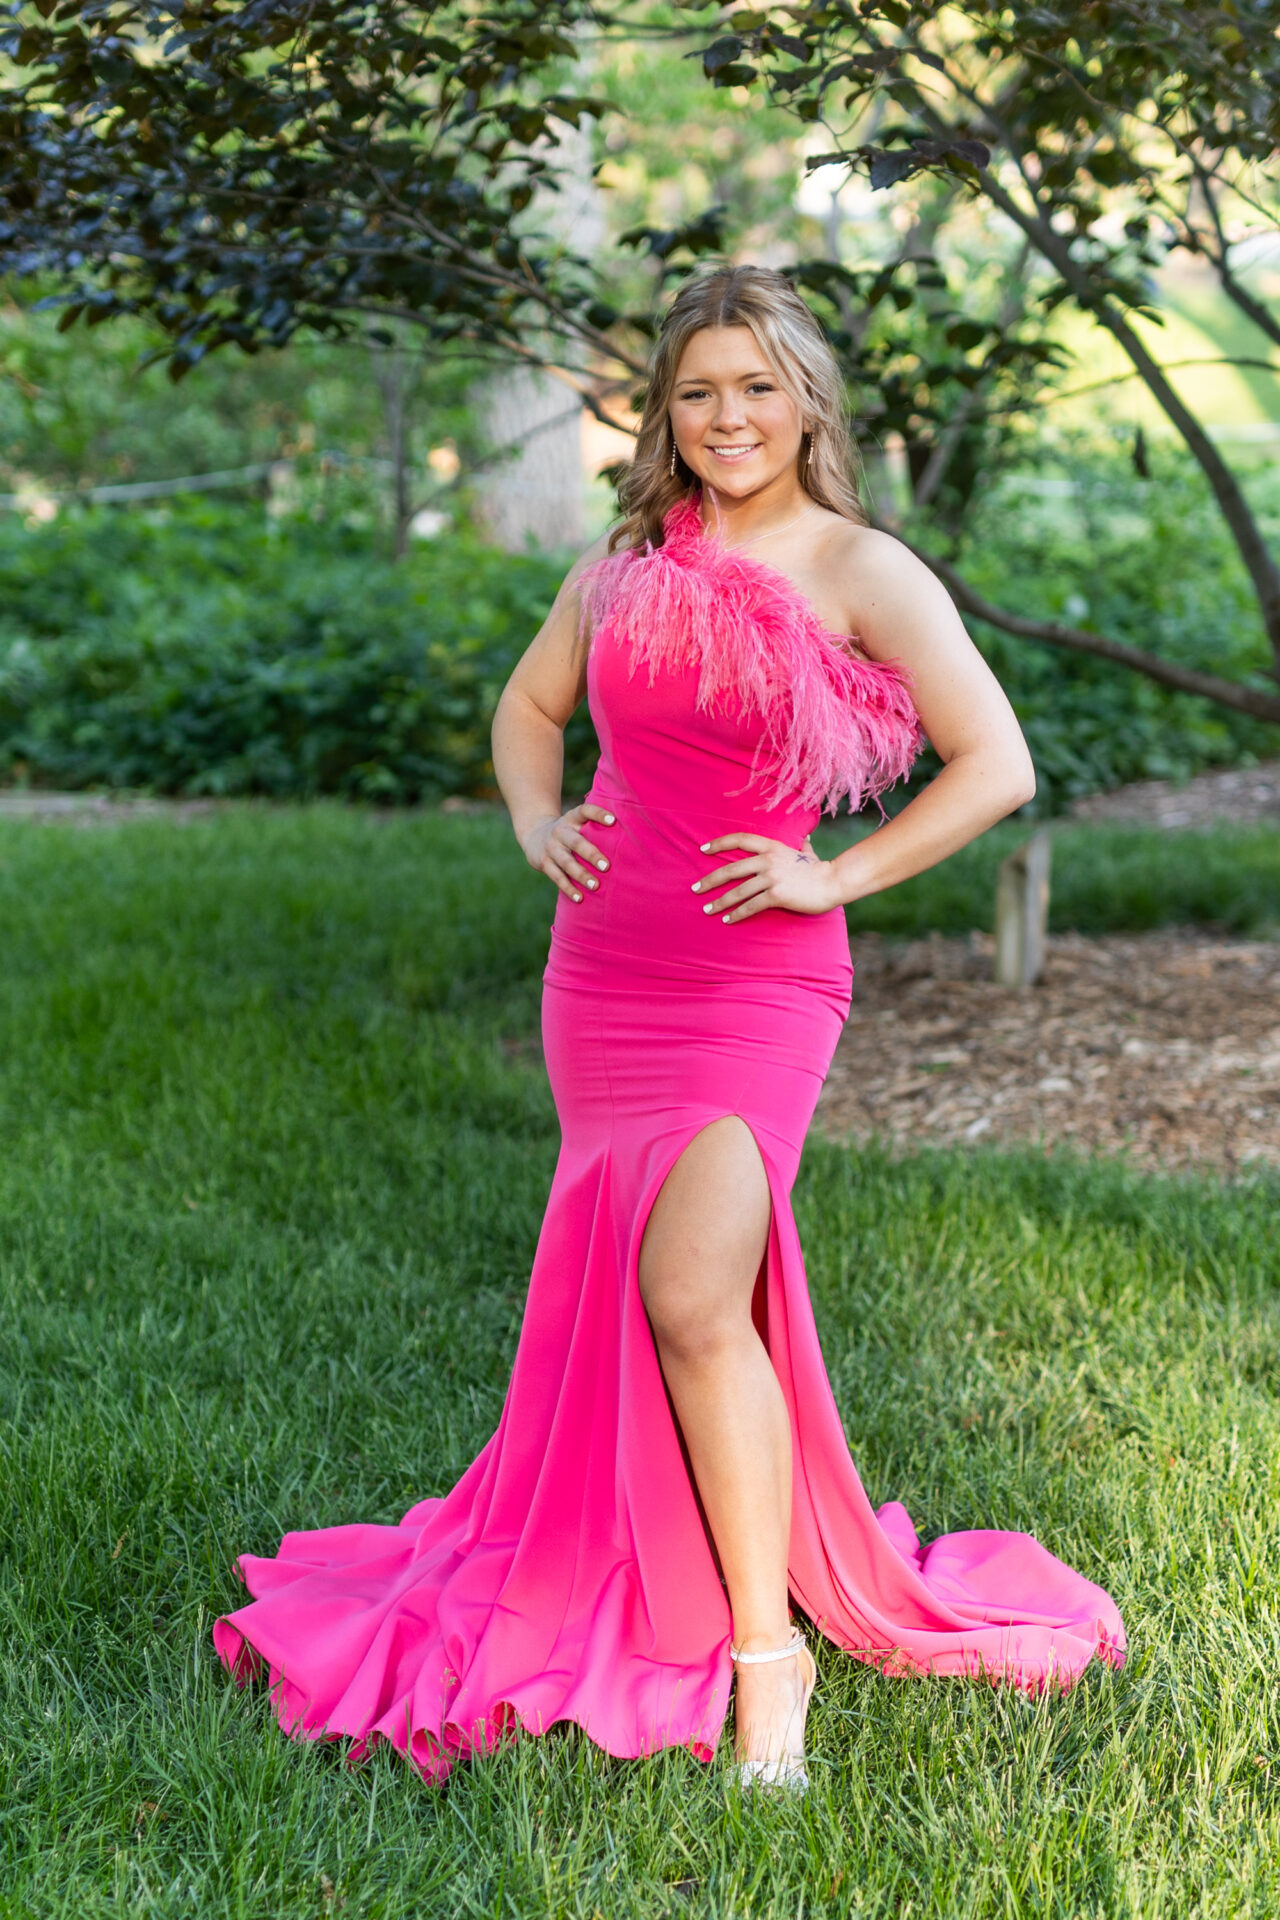 Girl wears pink gown with feathers at the top